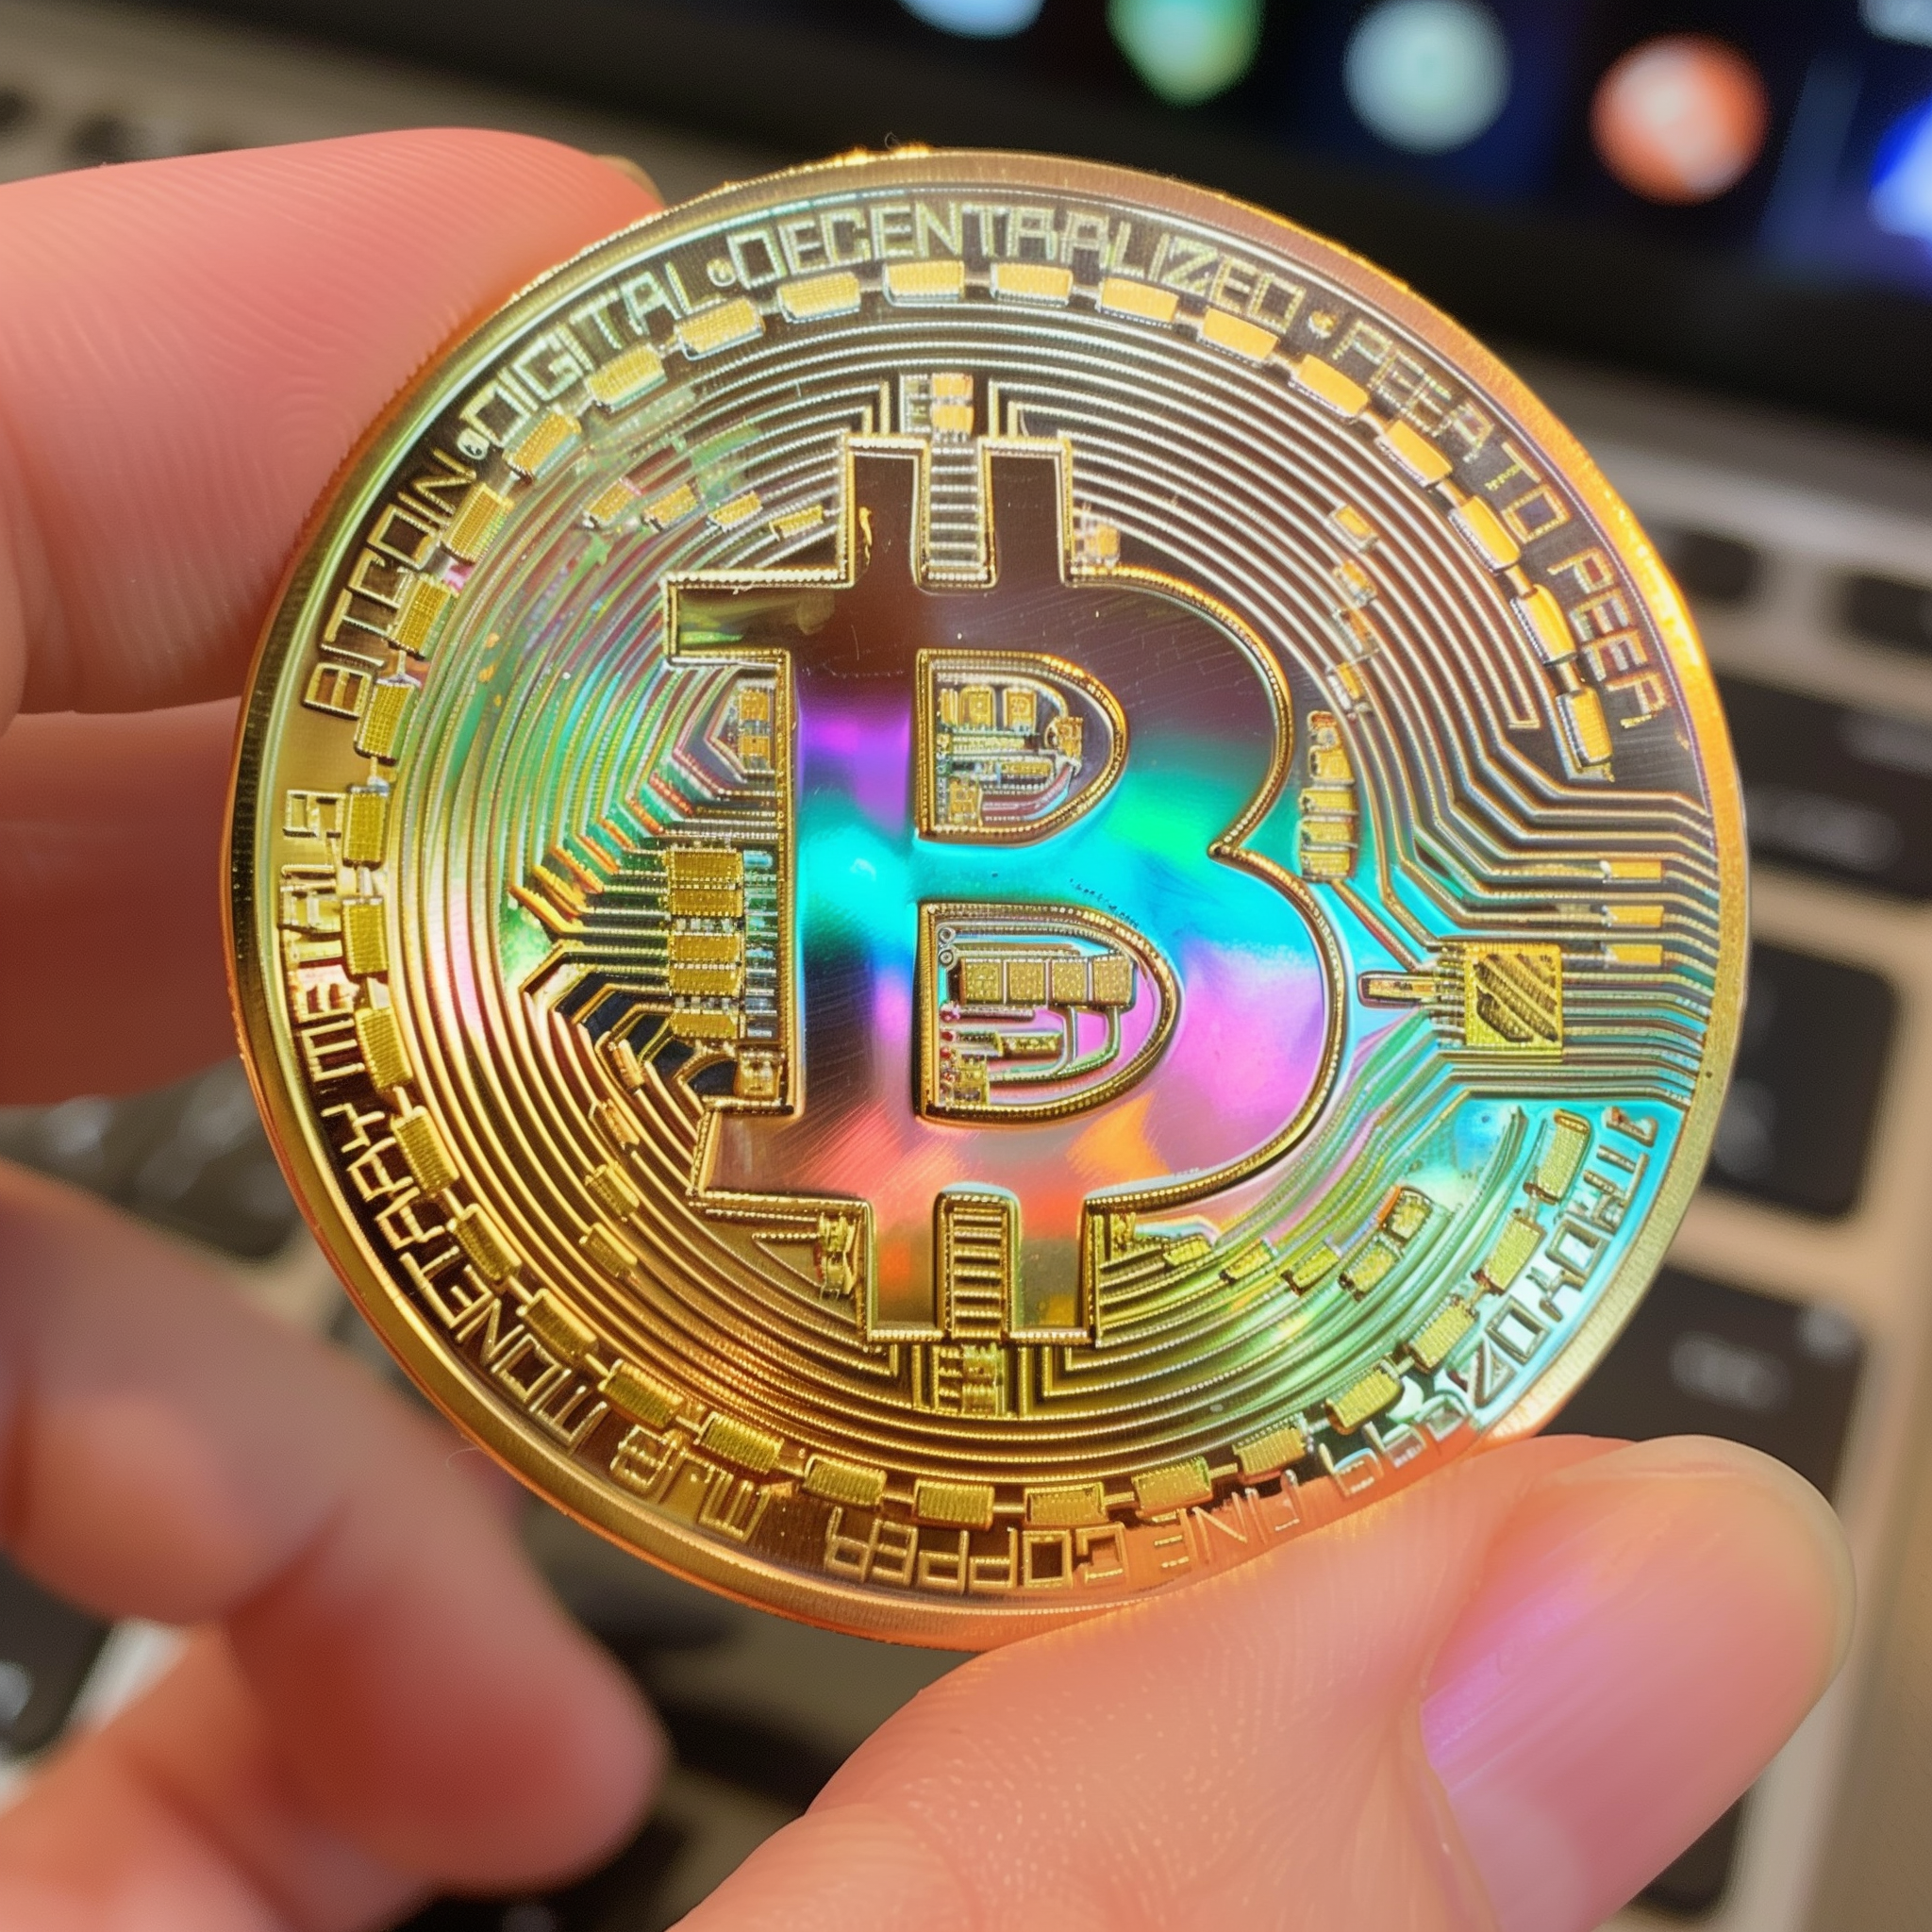 Close-up of a shiny Bitcoin held between fingers with blurred technology background, symbolizing cryptocurrency investment.